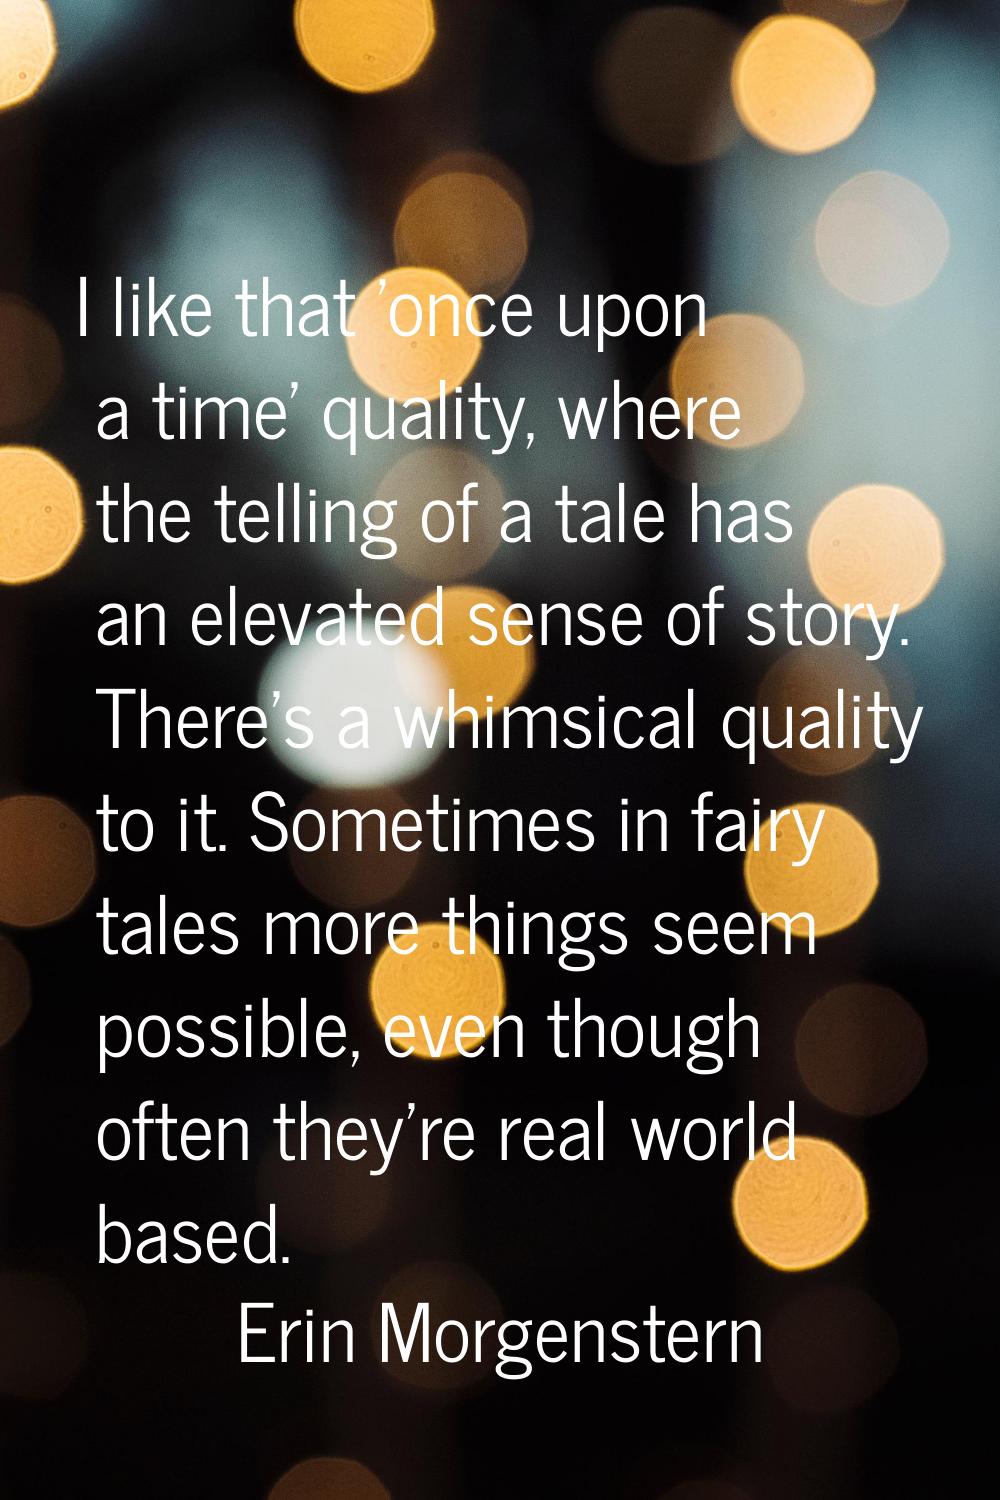 I like that 'once upon a time' quality, where the telling of a tale has an elevated sense of story.